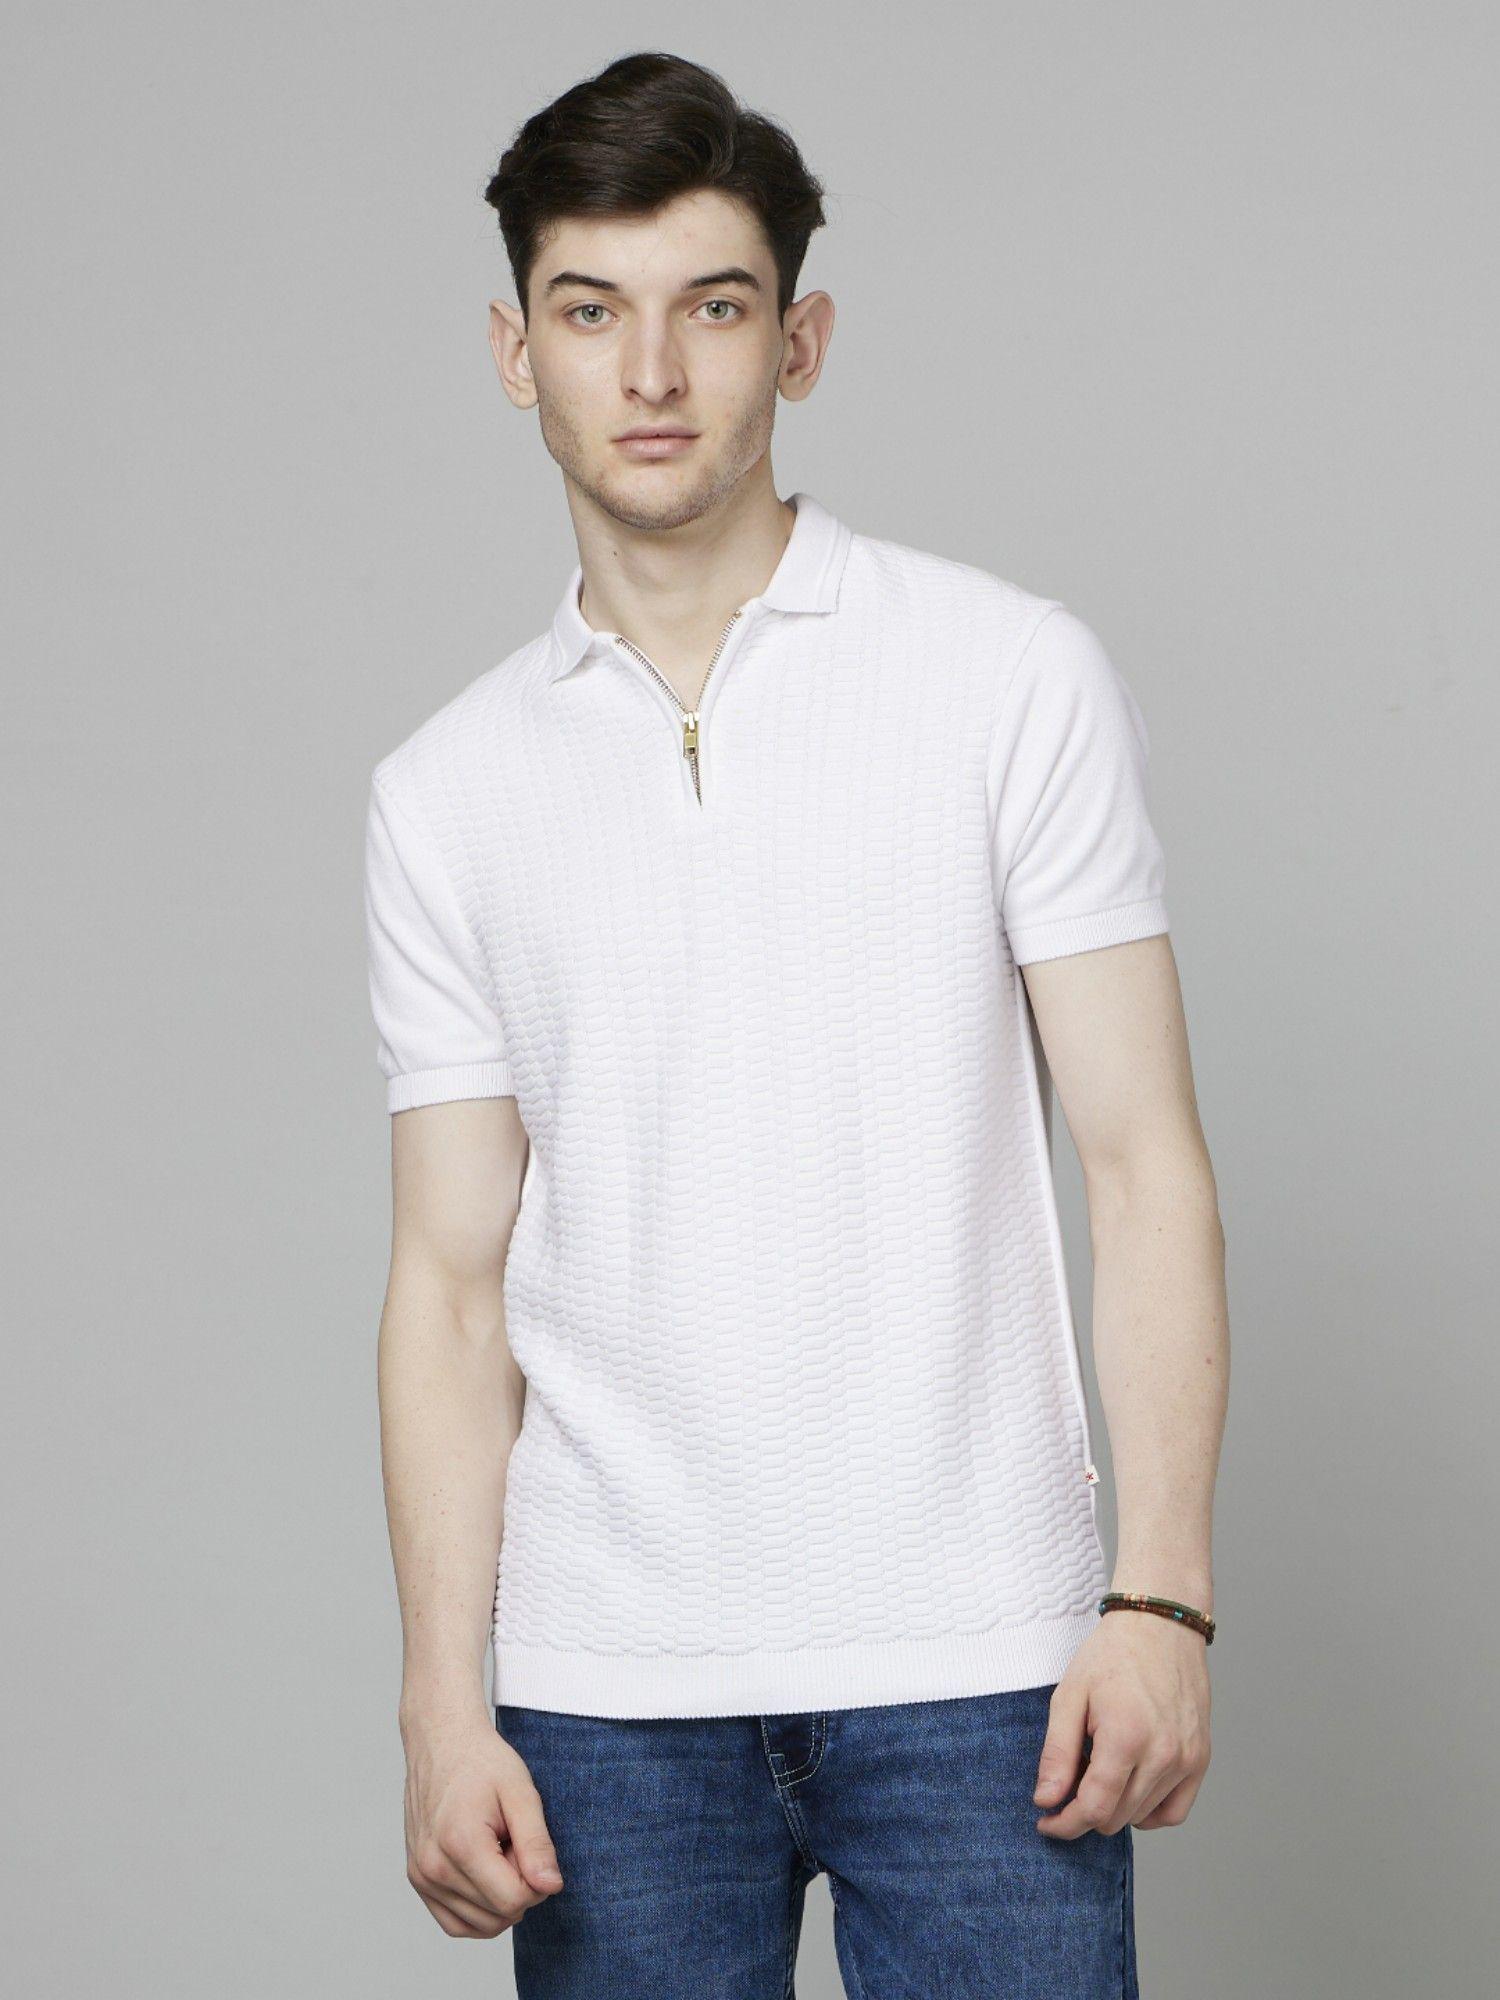 solid white short sleeves polo t-shirt